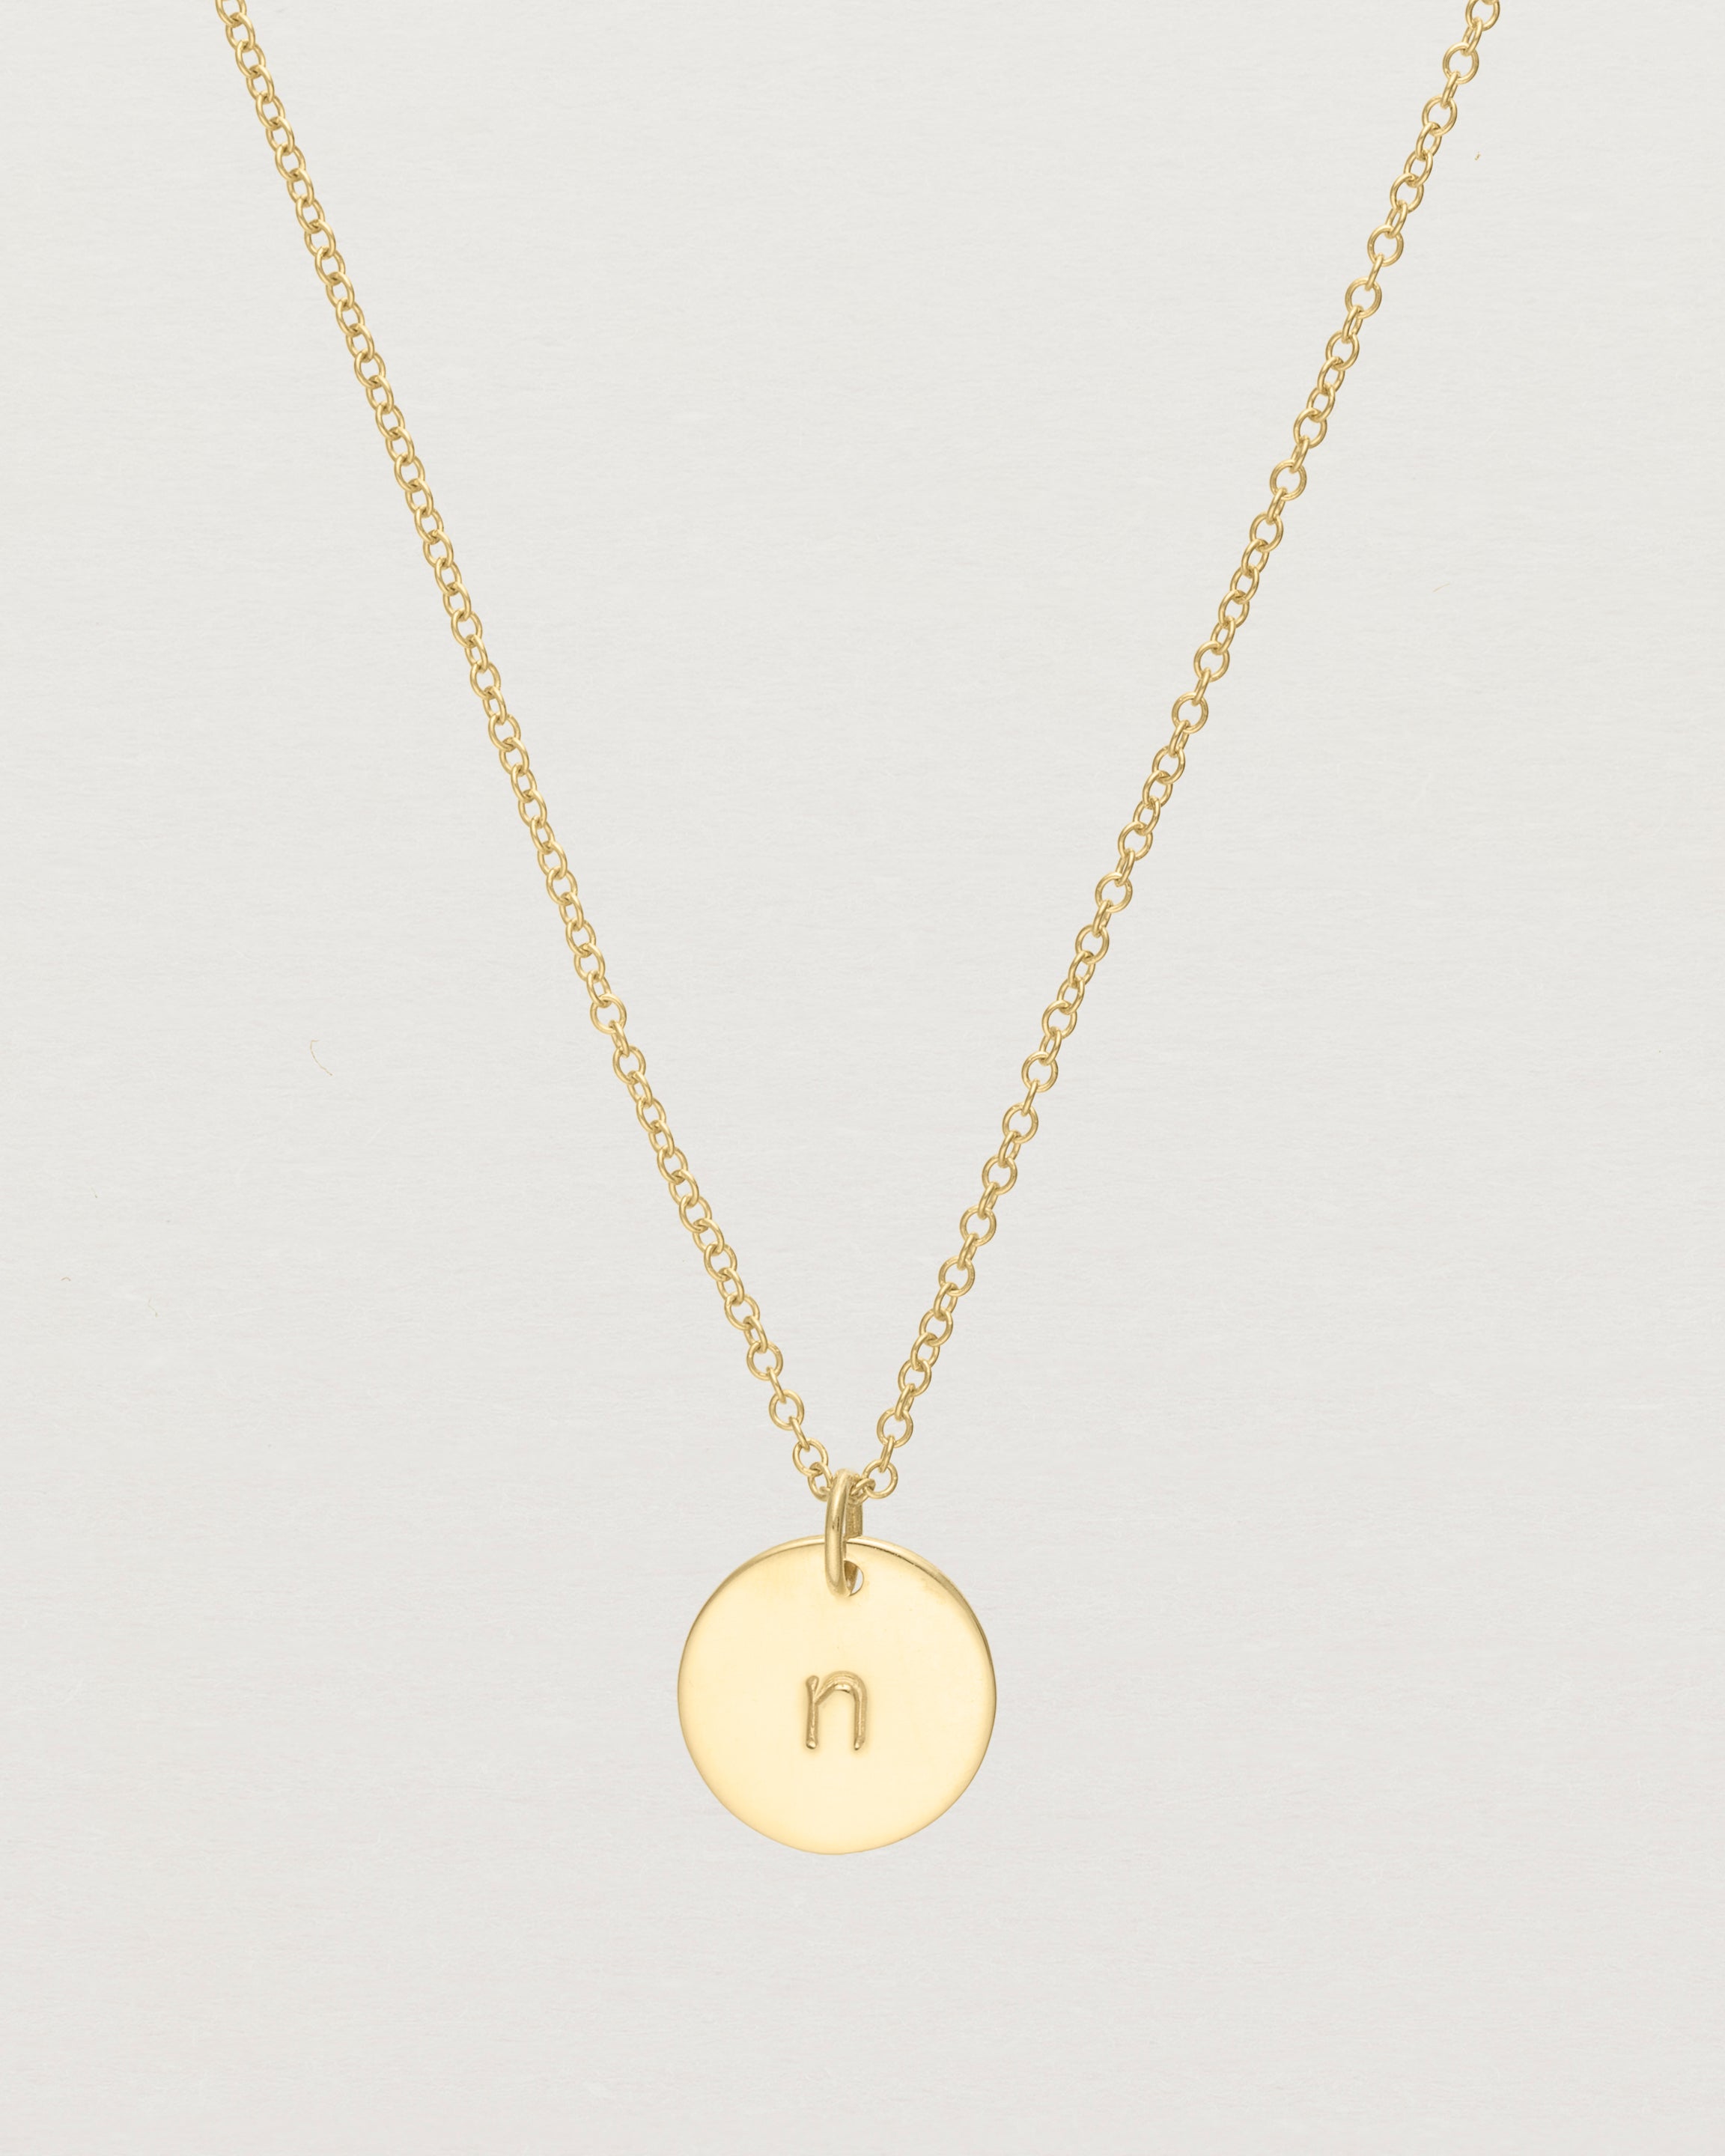 Close up of the Mini Initial Necklace in Yellow Gold.